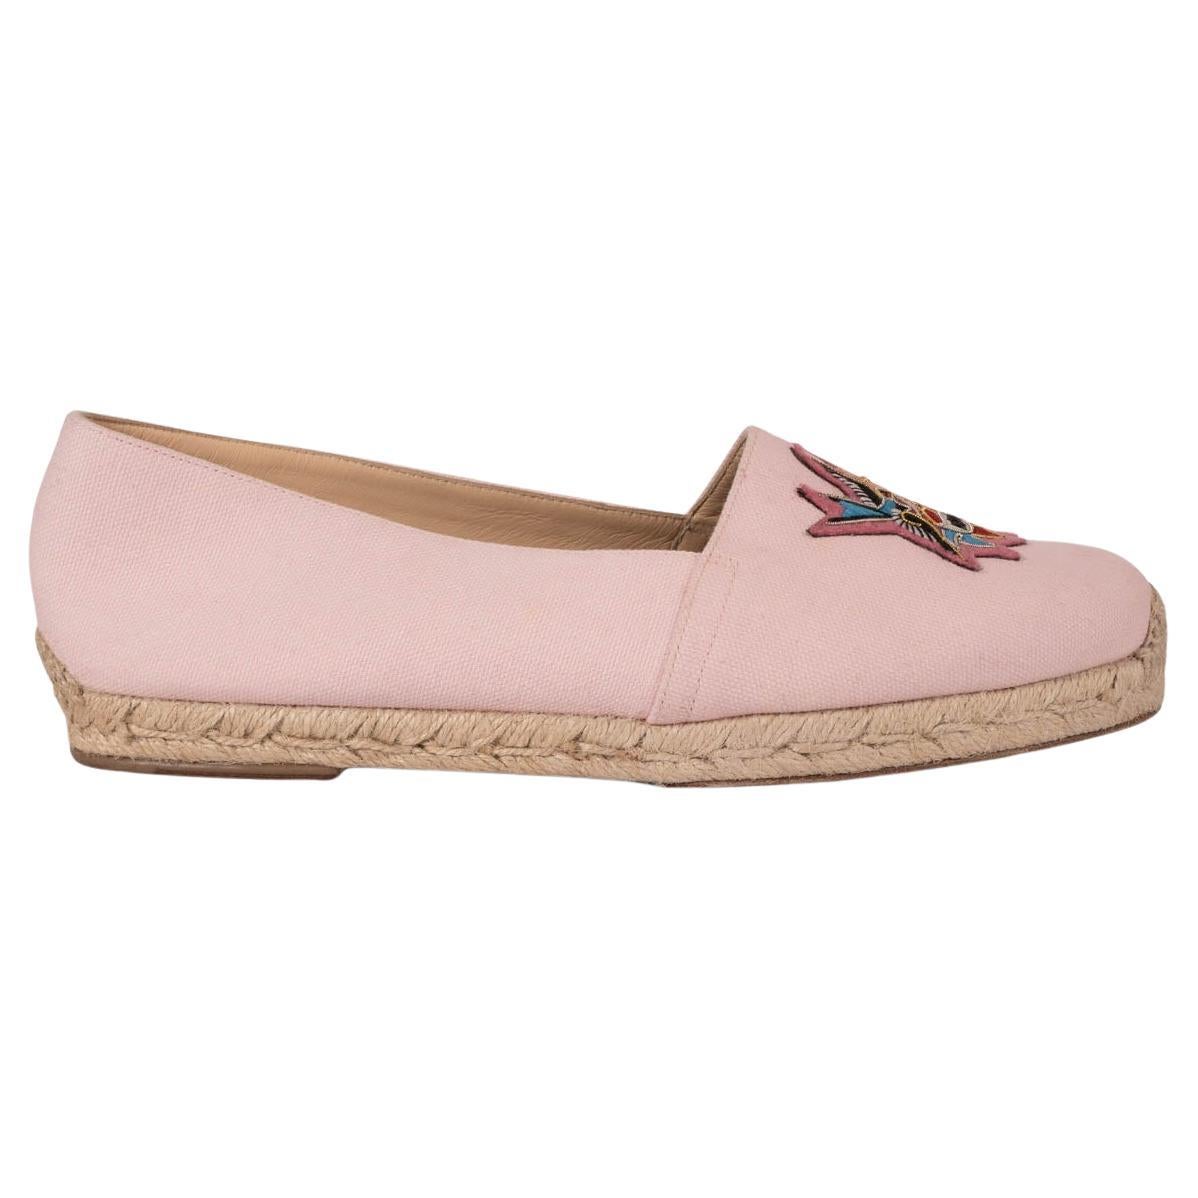 CHRISTIAN LOUBOUTIN pink canvas MOM AND DAD ESPADRILLES Shoes 39 fit 38.5 For Sale